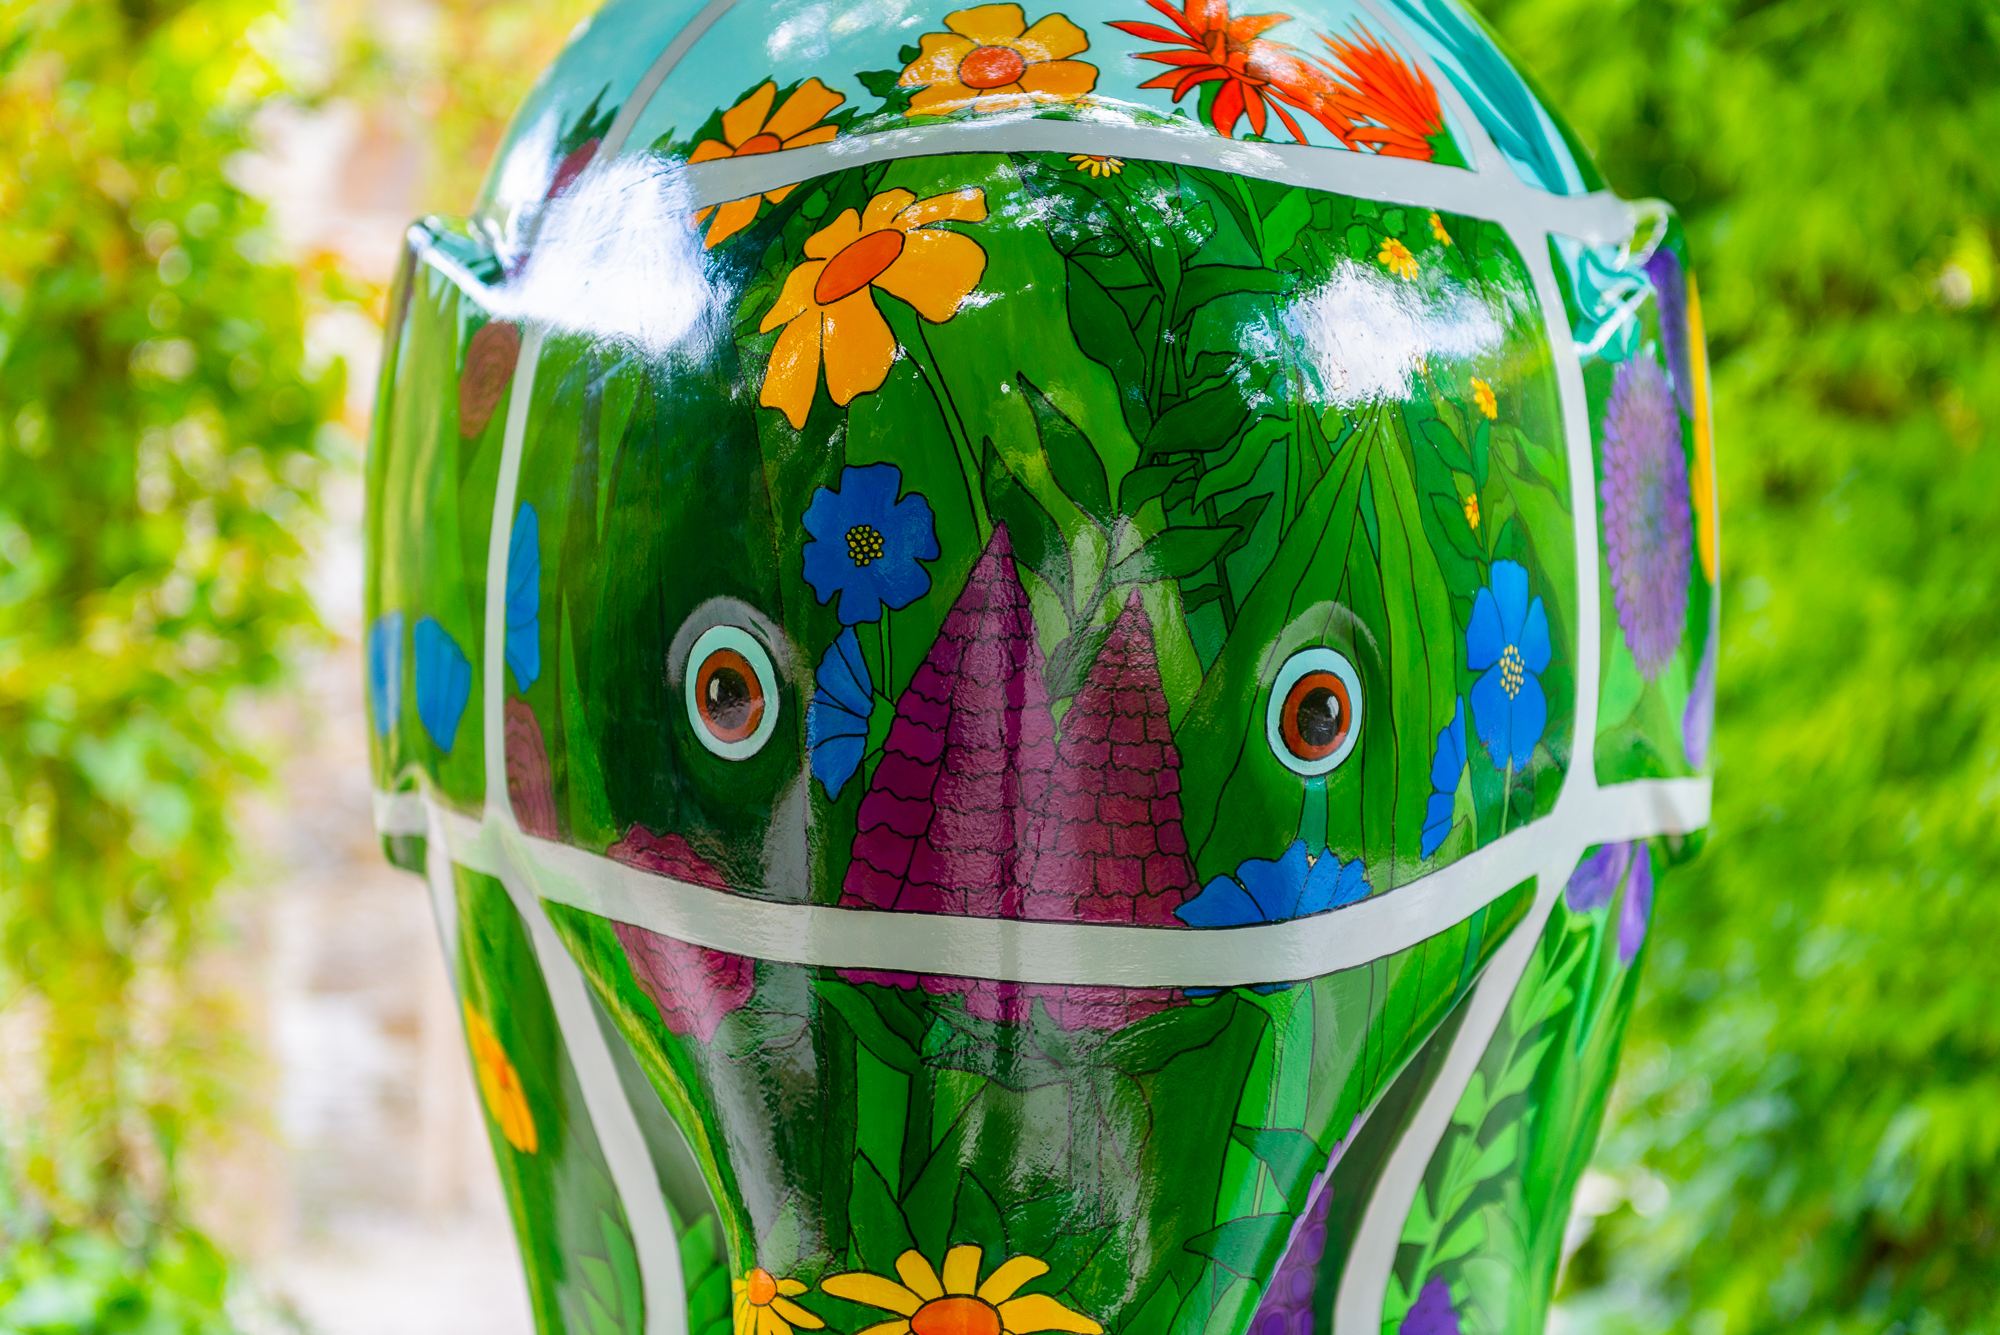 'Blooming Greenhouse' by Leah Hayler. Sponsored by St Luke's Hospice Plymouth - Image 7 of 13